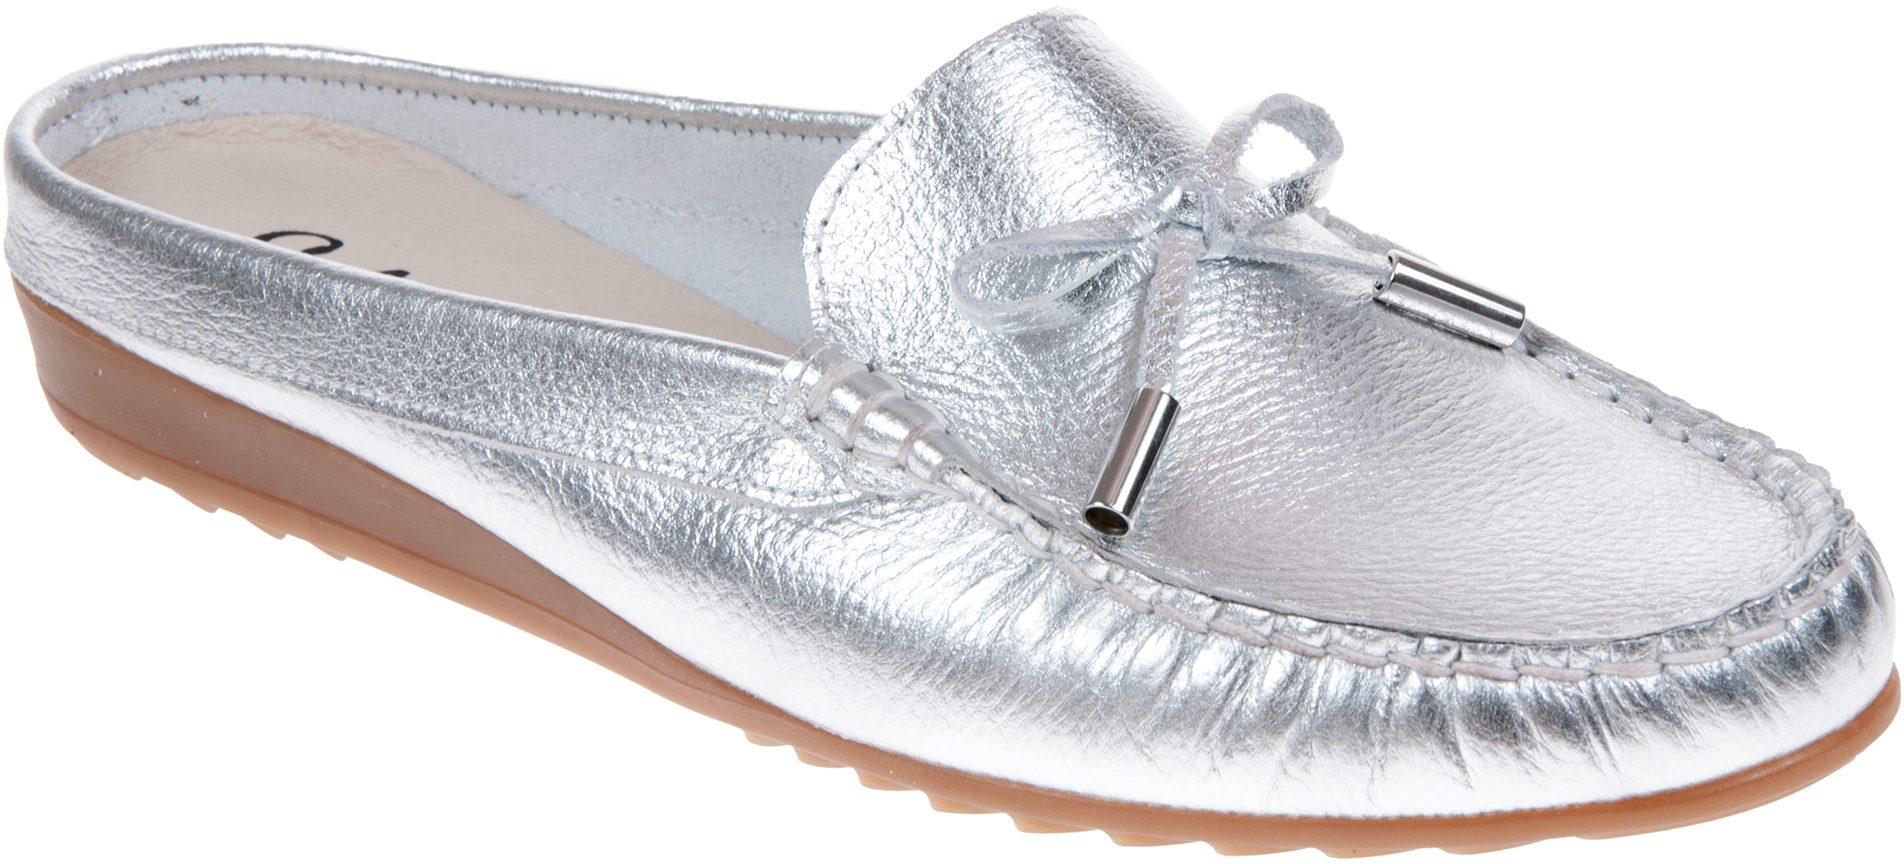 Cefalu 10057 Silver 10057 - Everyday Shoes - Humphries Shoes